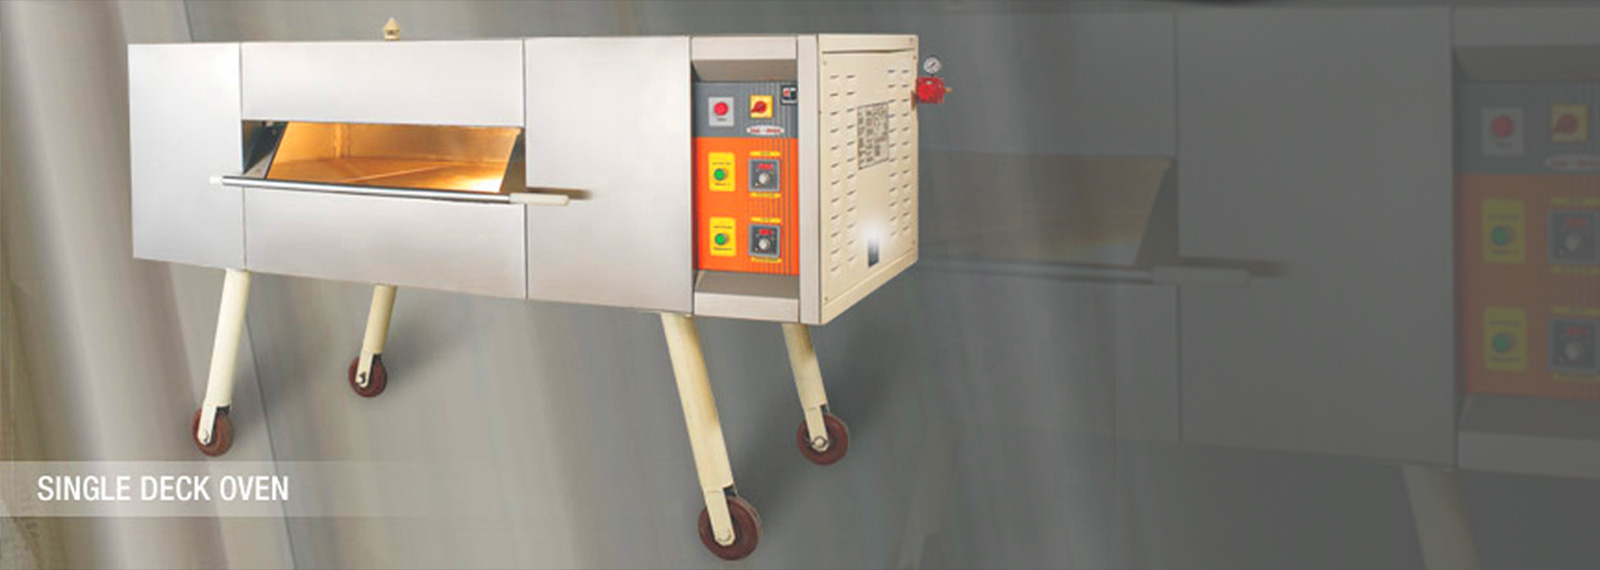 Deck Oven Manufacturers in Bangalore